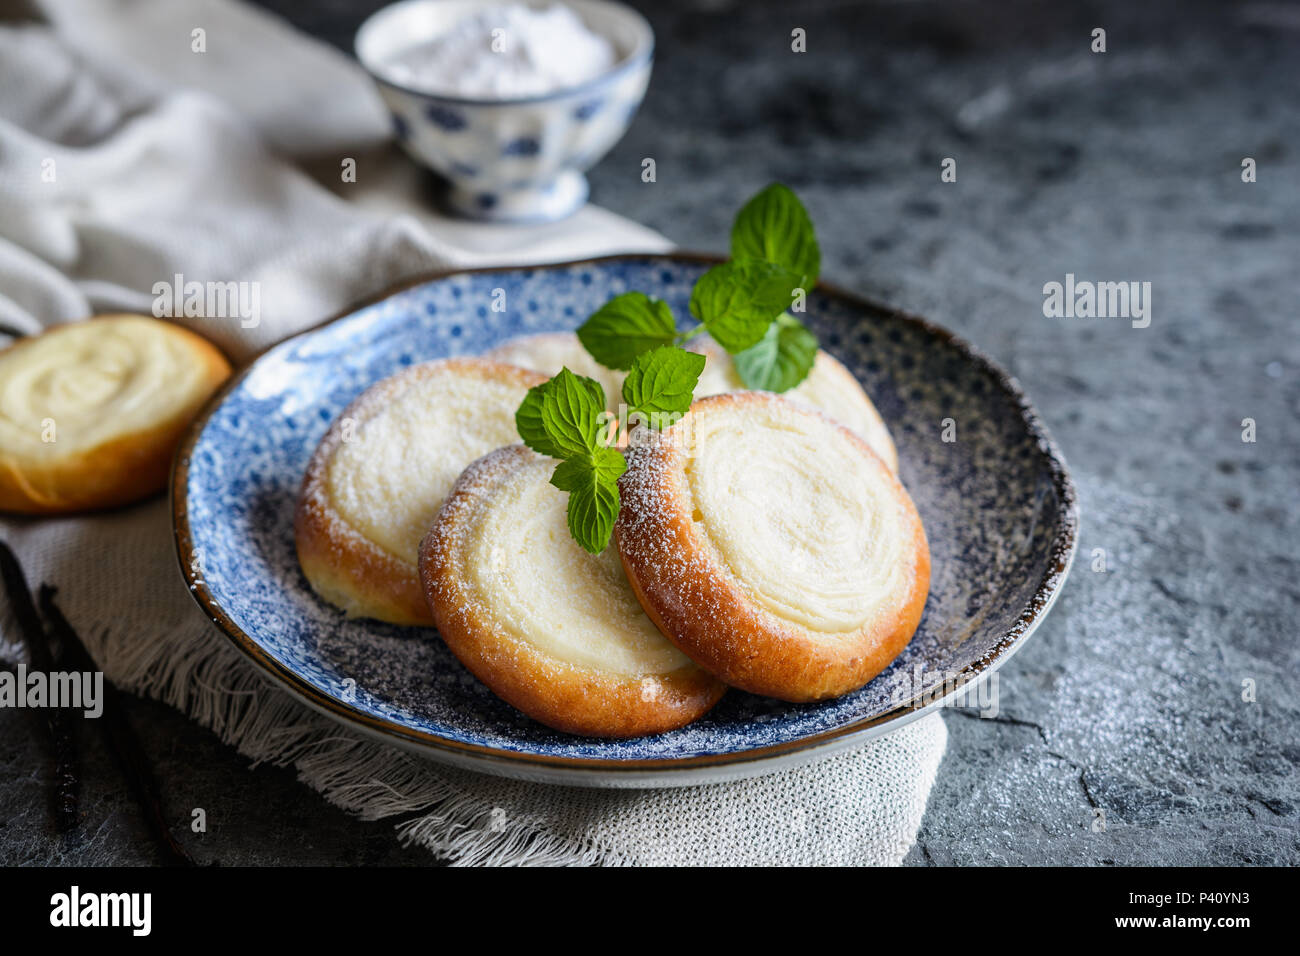 Freshly baked small round pies filled with vanilla cream cheese Stock Photo